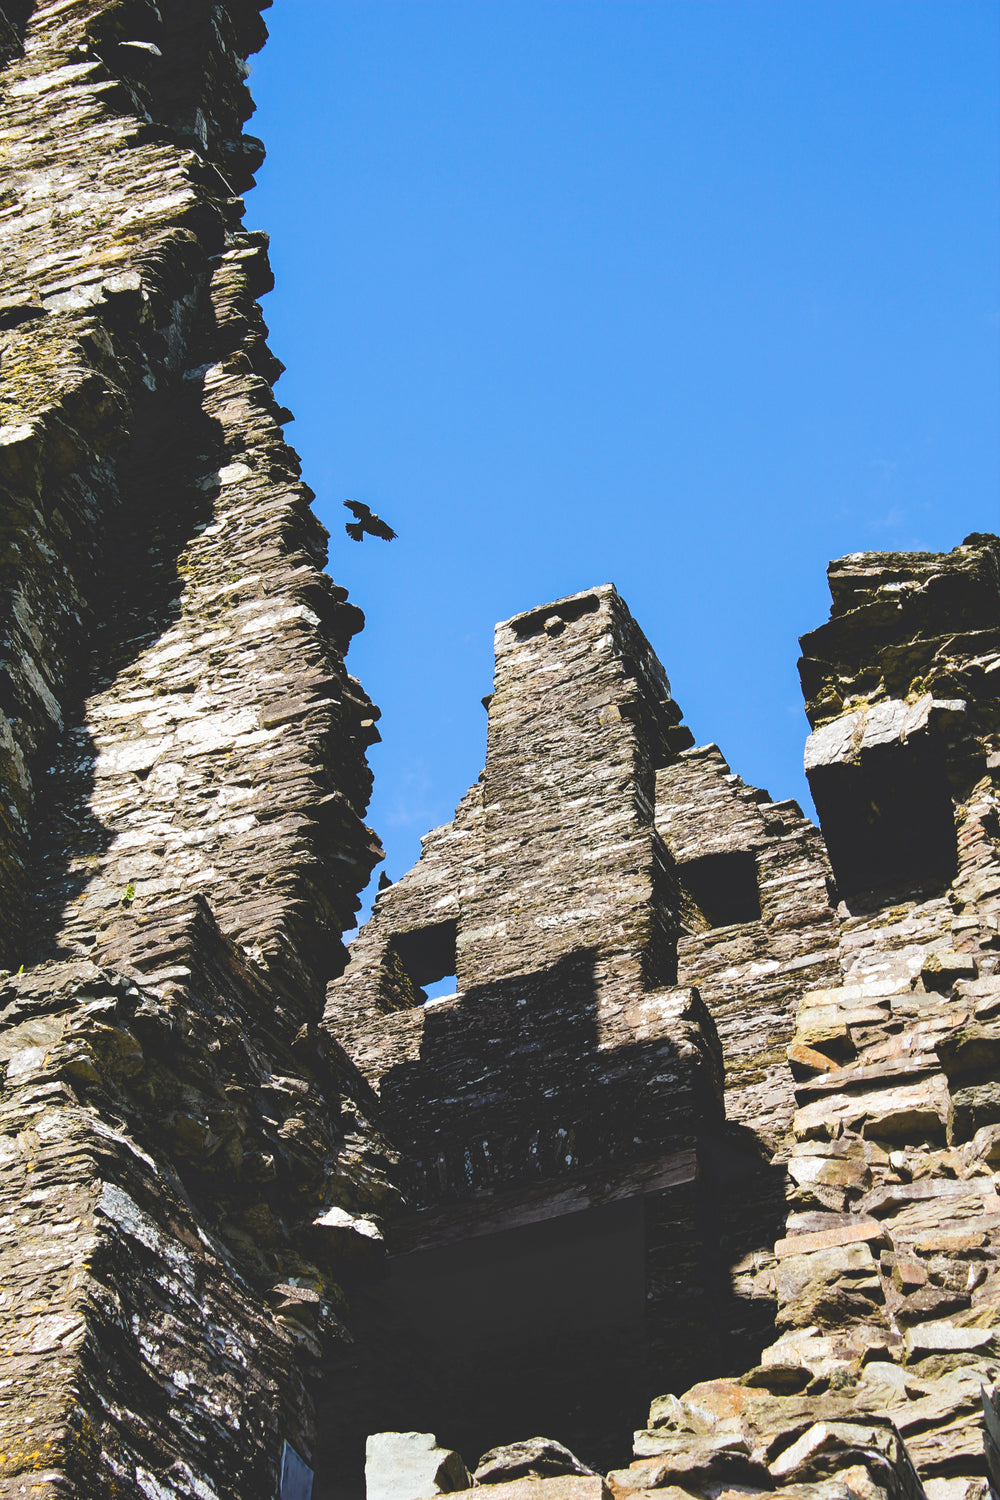 lone crow floats on wind up the wall of a rustic castle